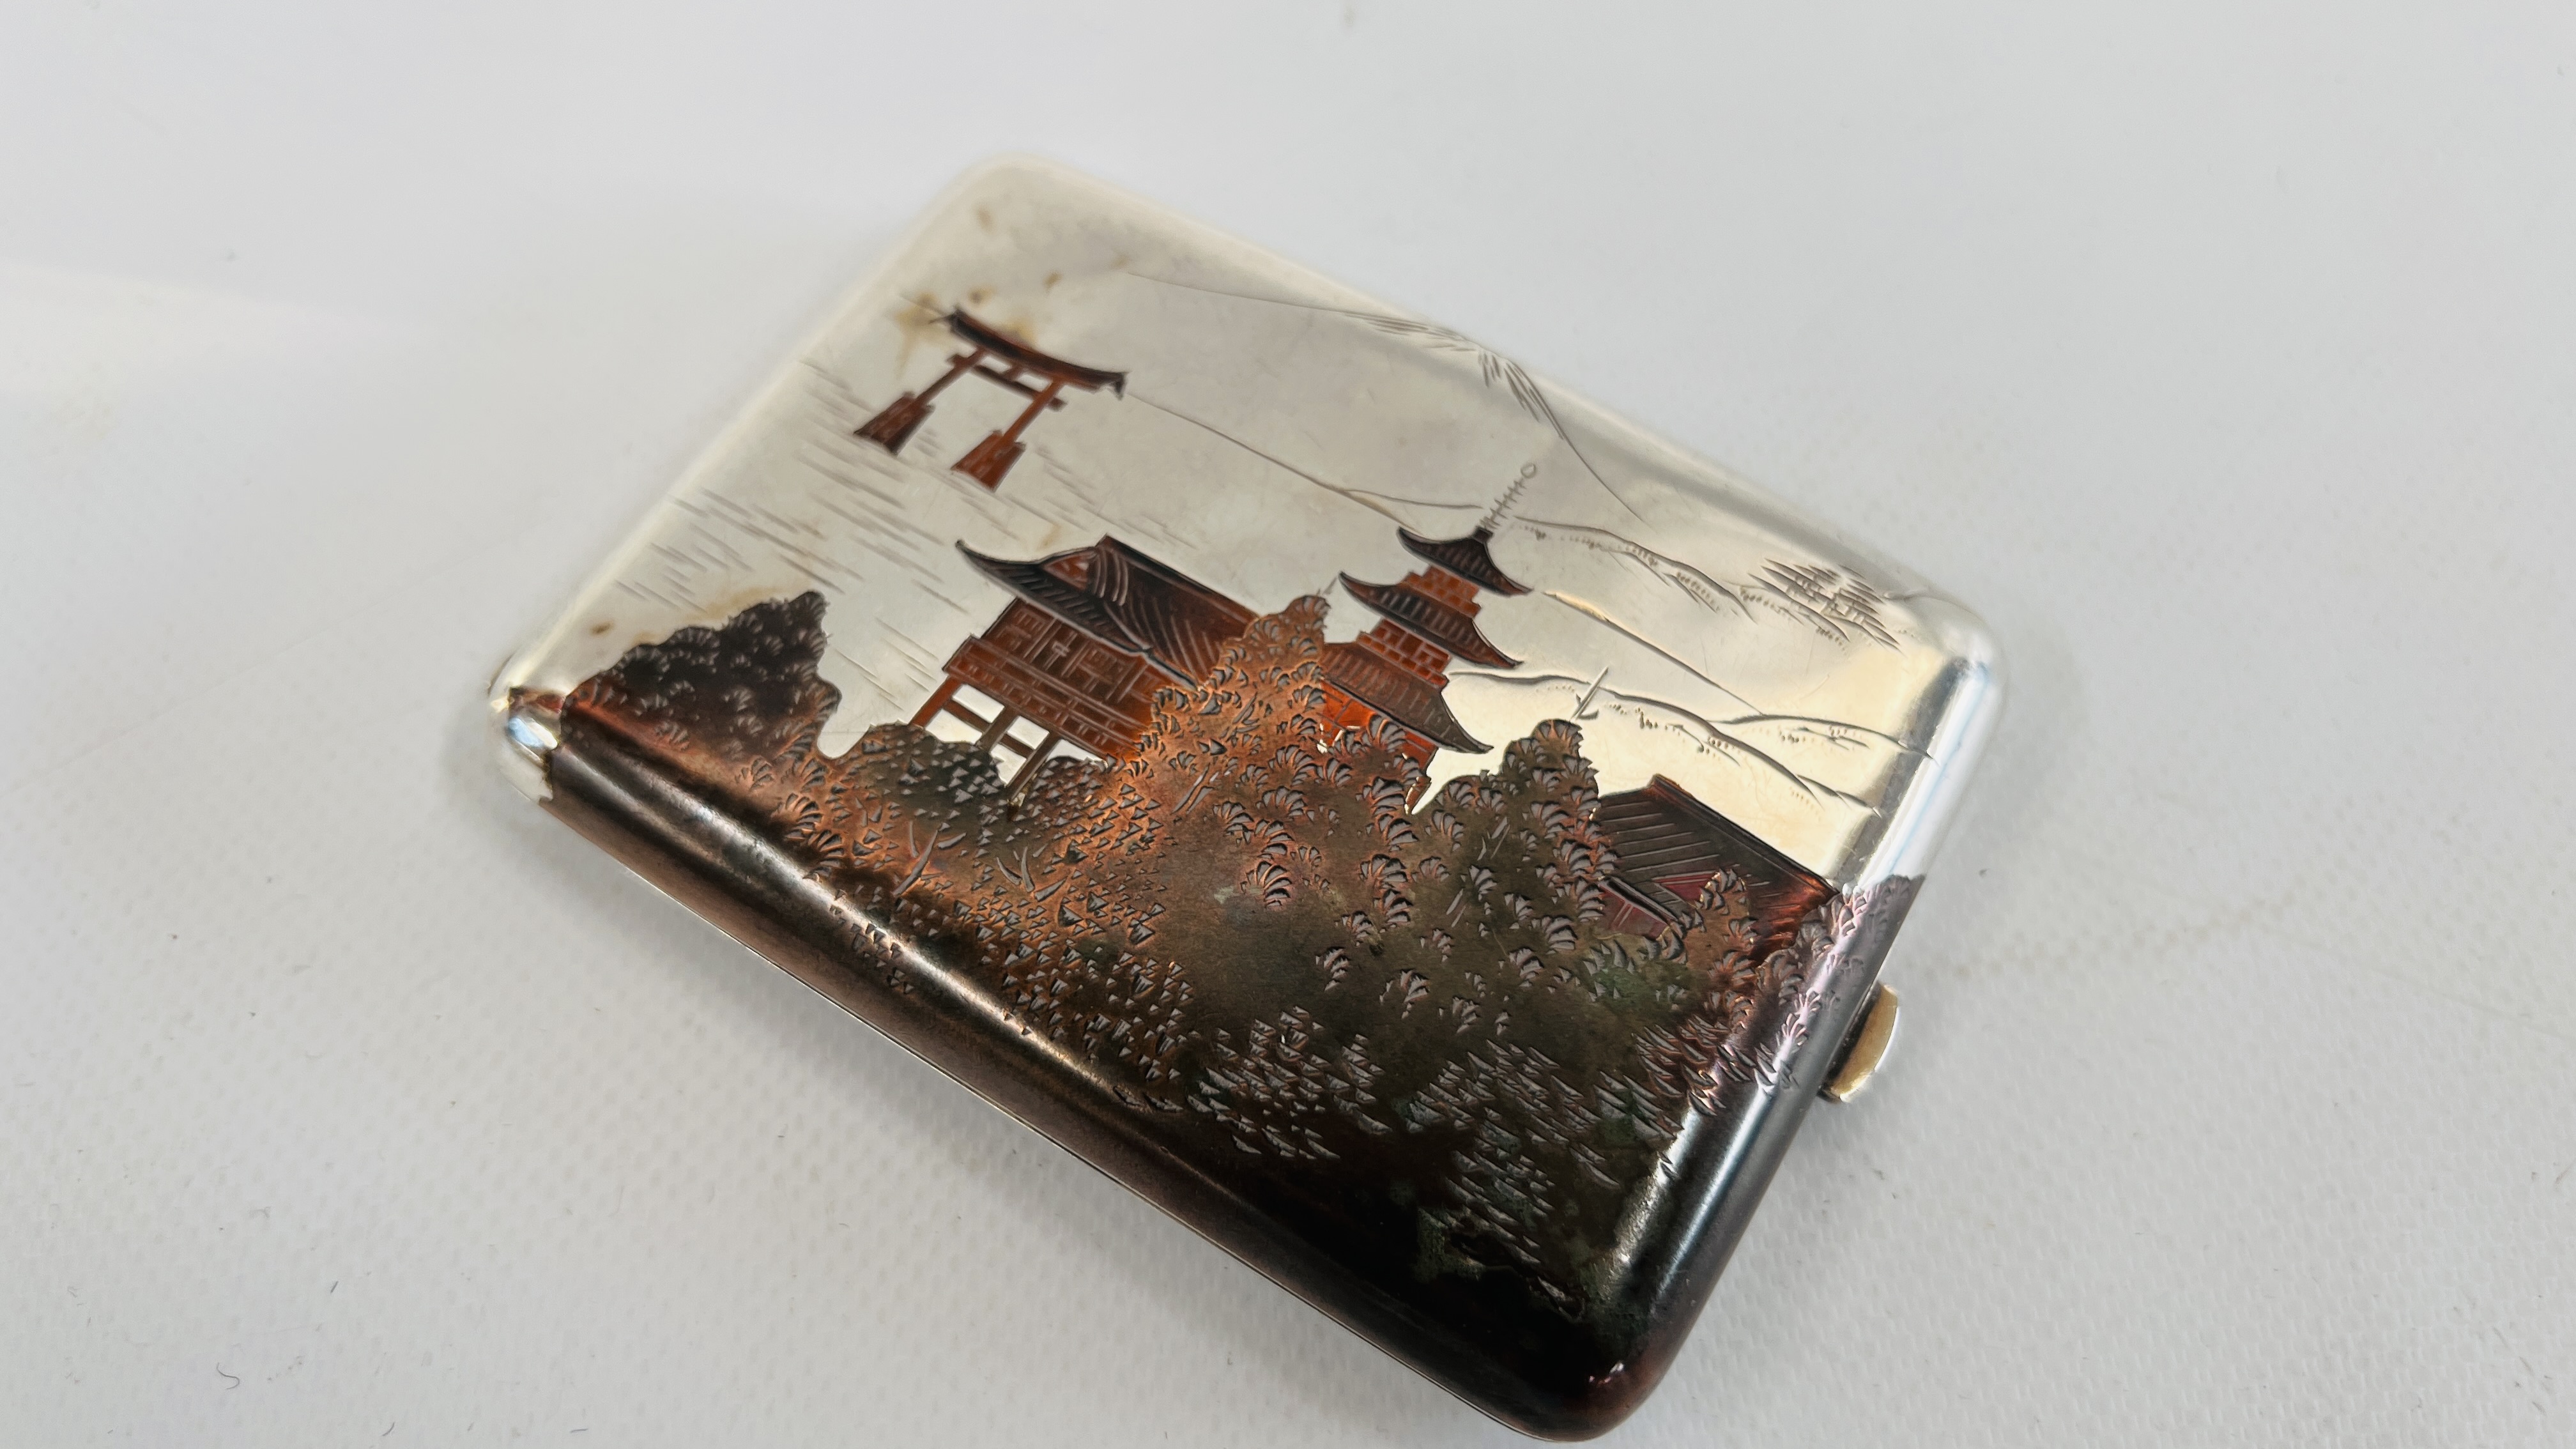 A JAPANESE STYLE SILVER AND MIXED METAL CIGARETTE CASE. L 11.5CM. X H 8CM. - Image 2 of 5